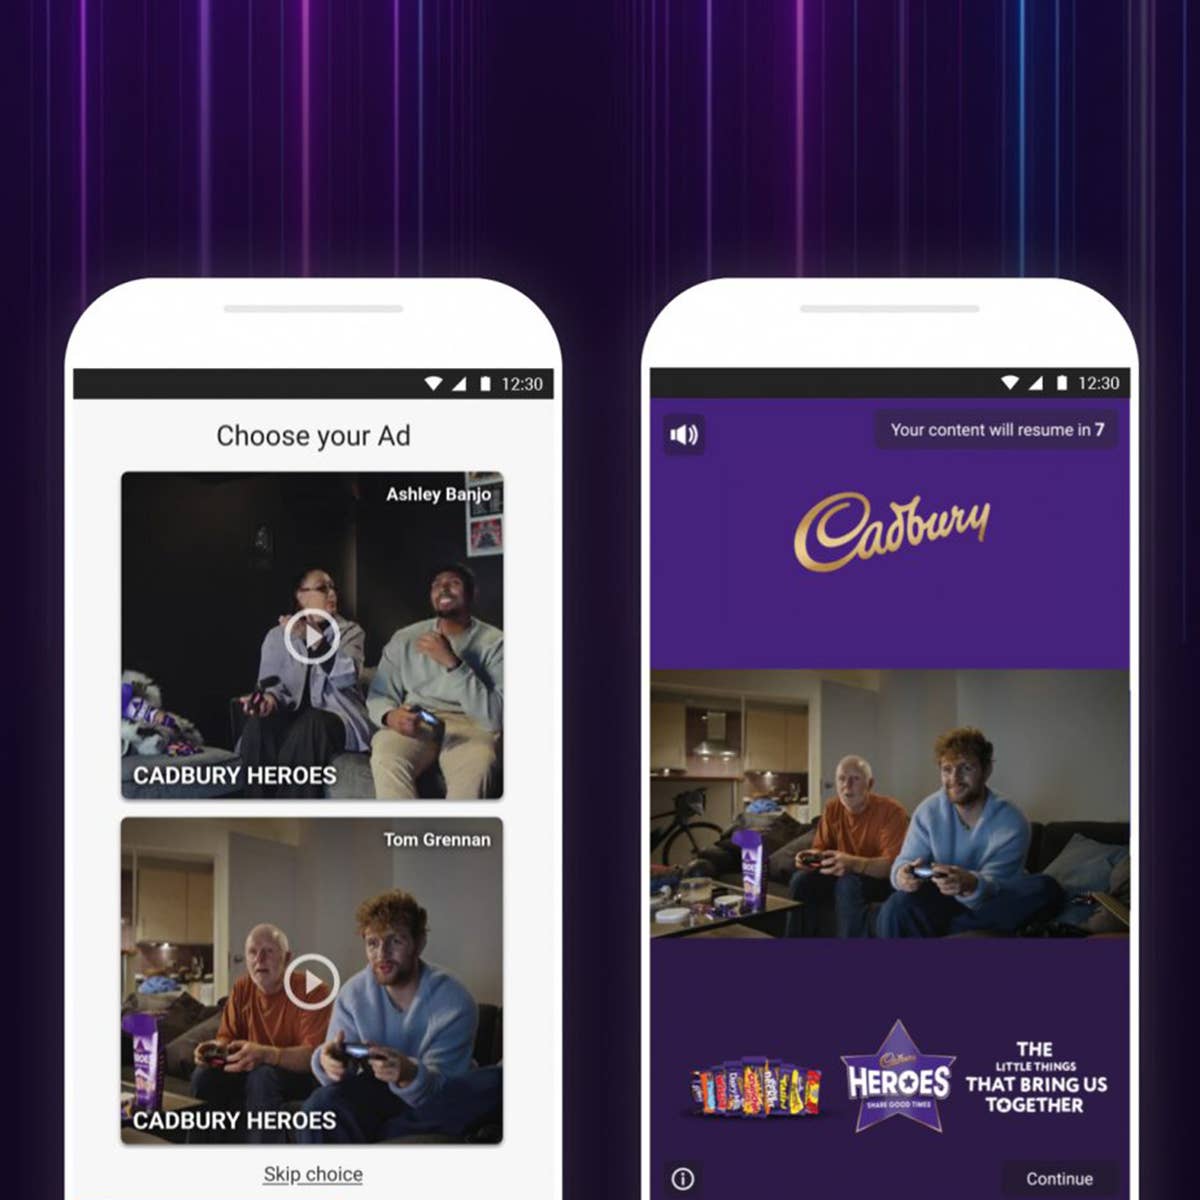 Cadbury achieves 97.2% viewability rate with interactive ad format